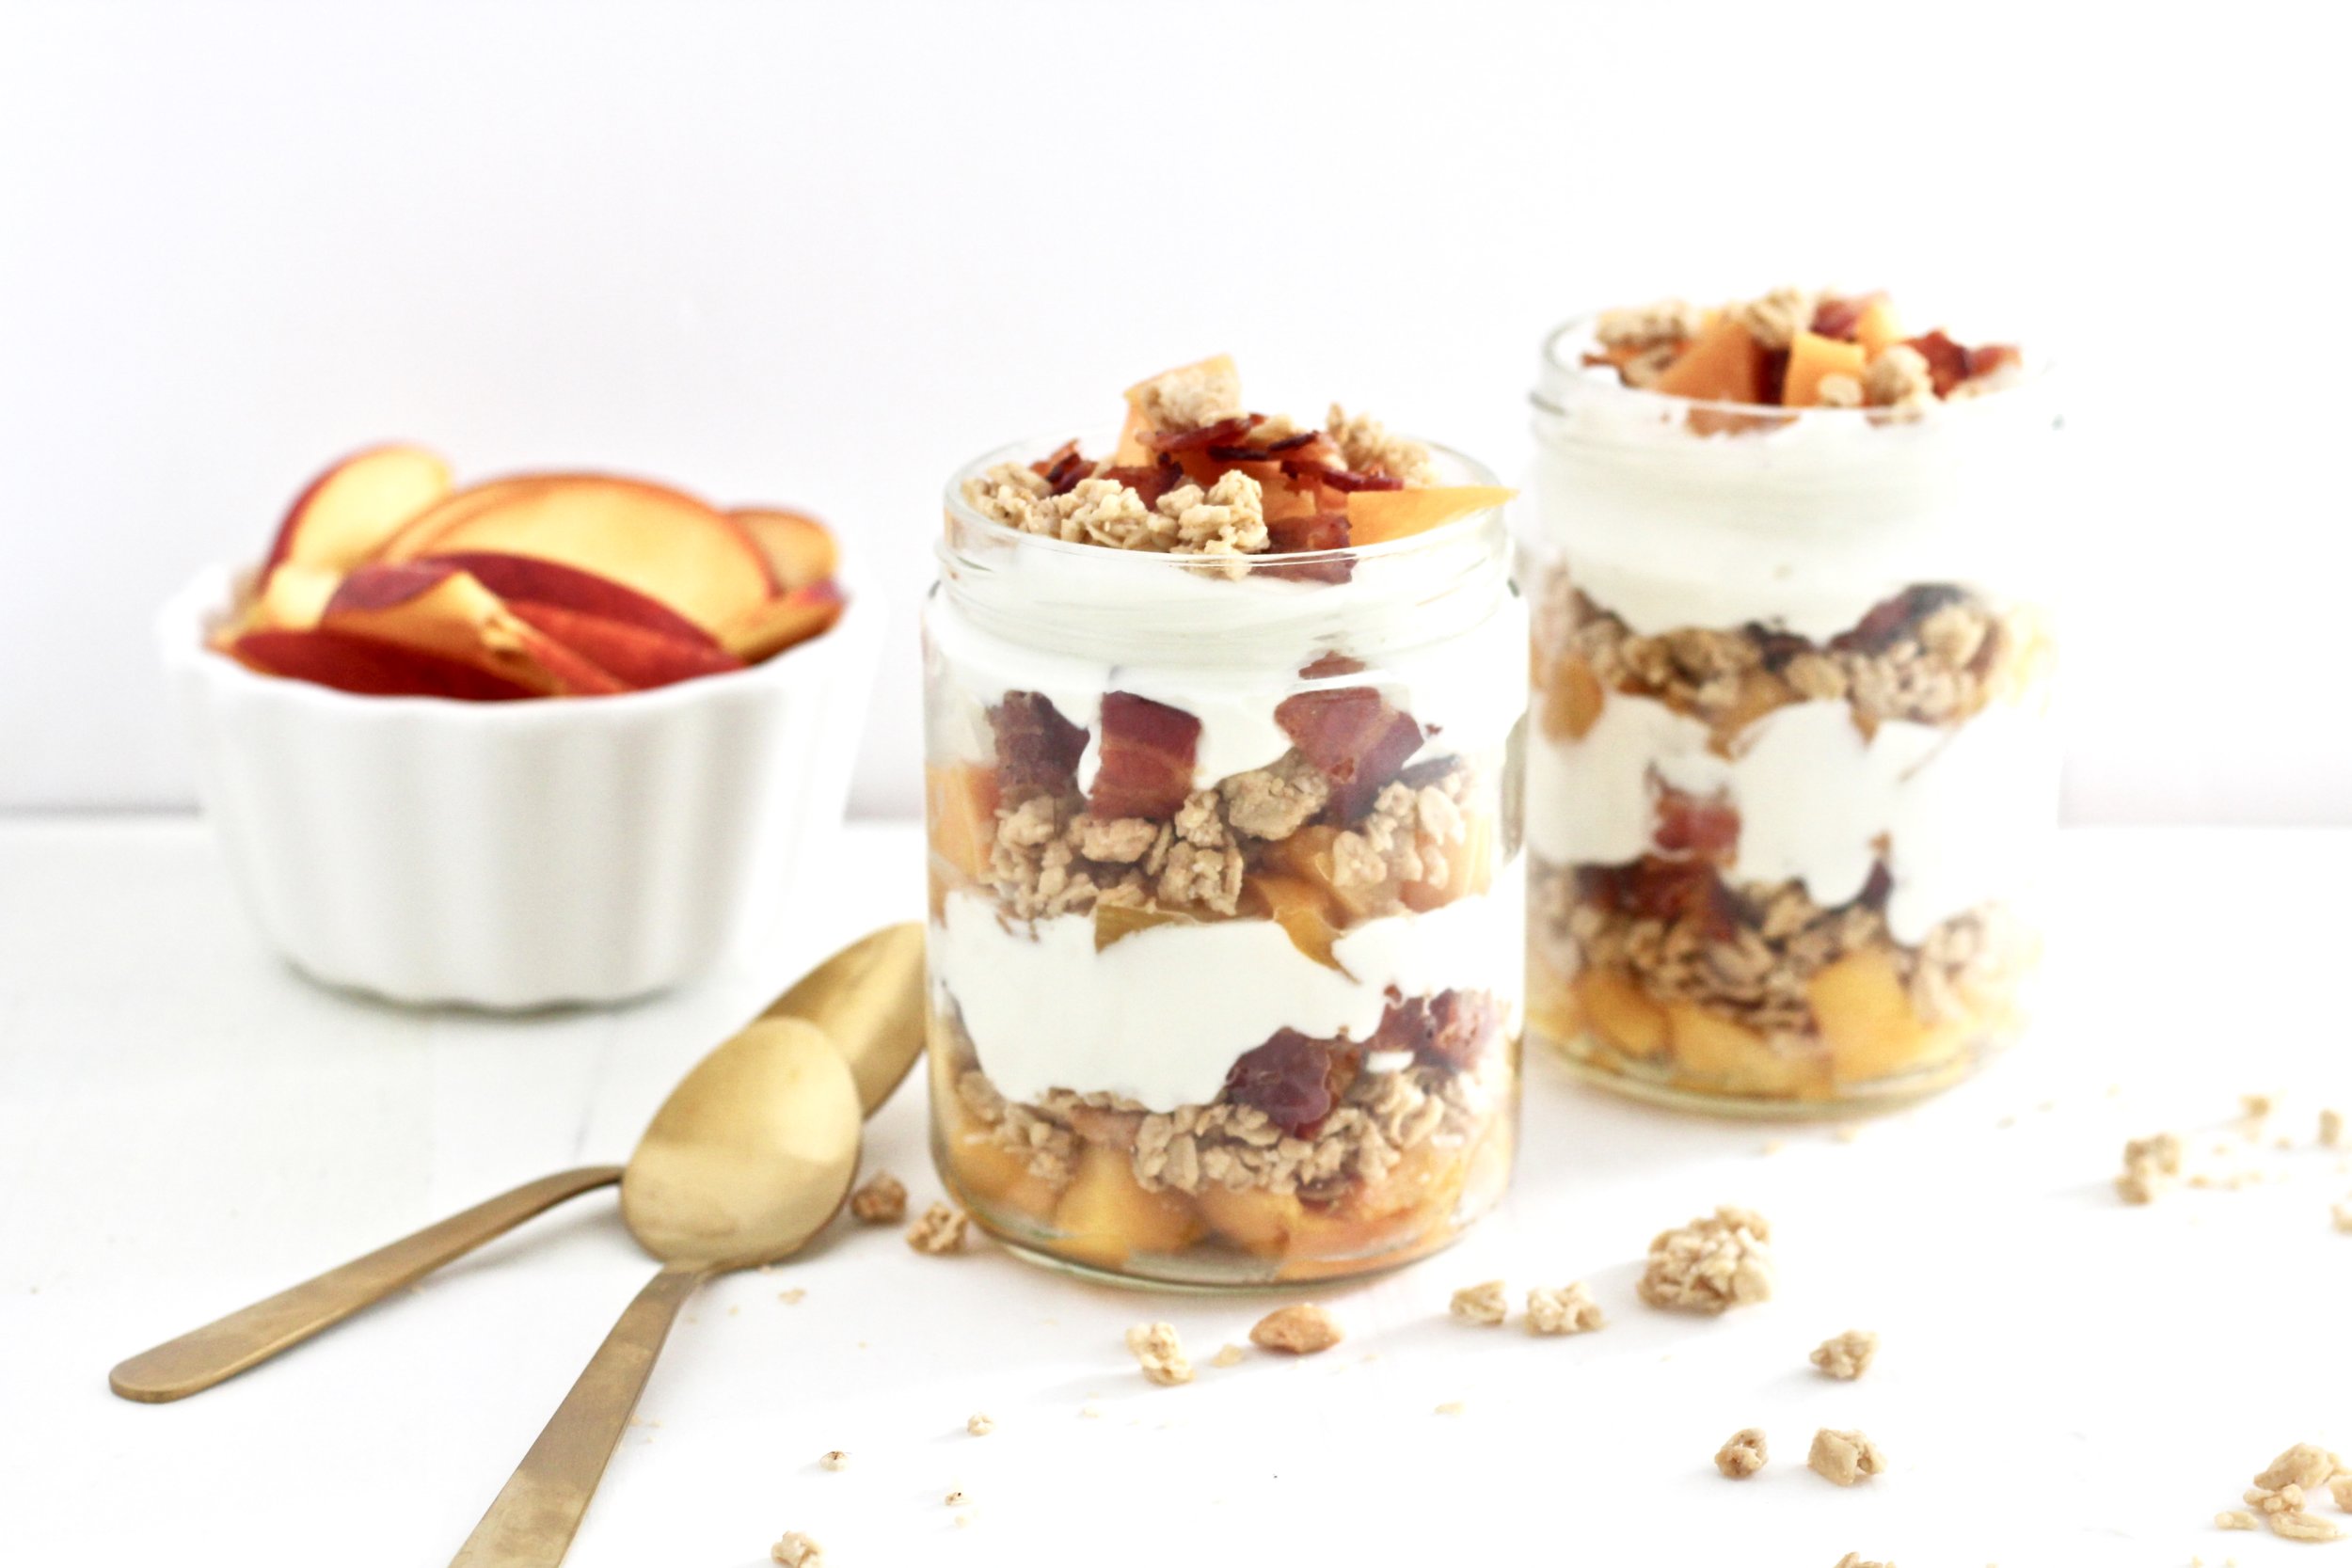  Peaches & Cream Parfaits with Maple Bacon Crumbles 